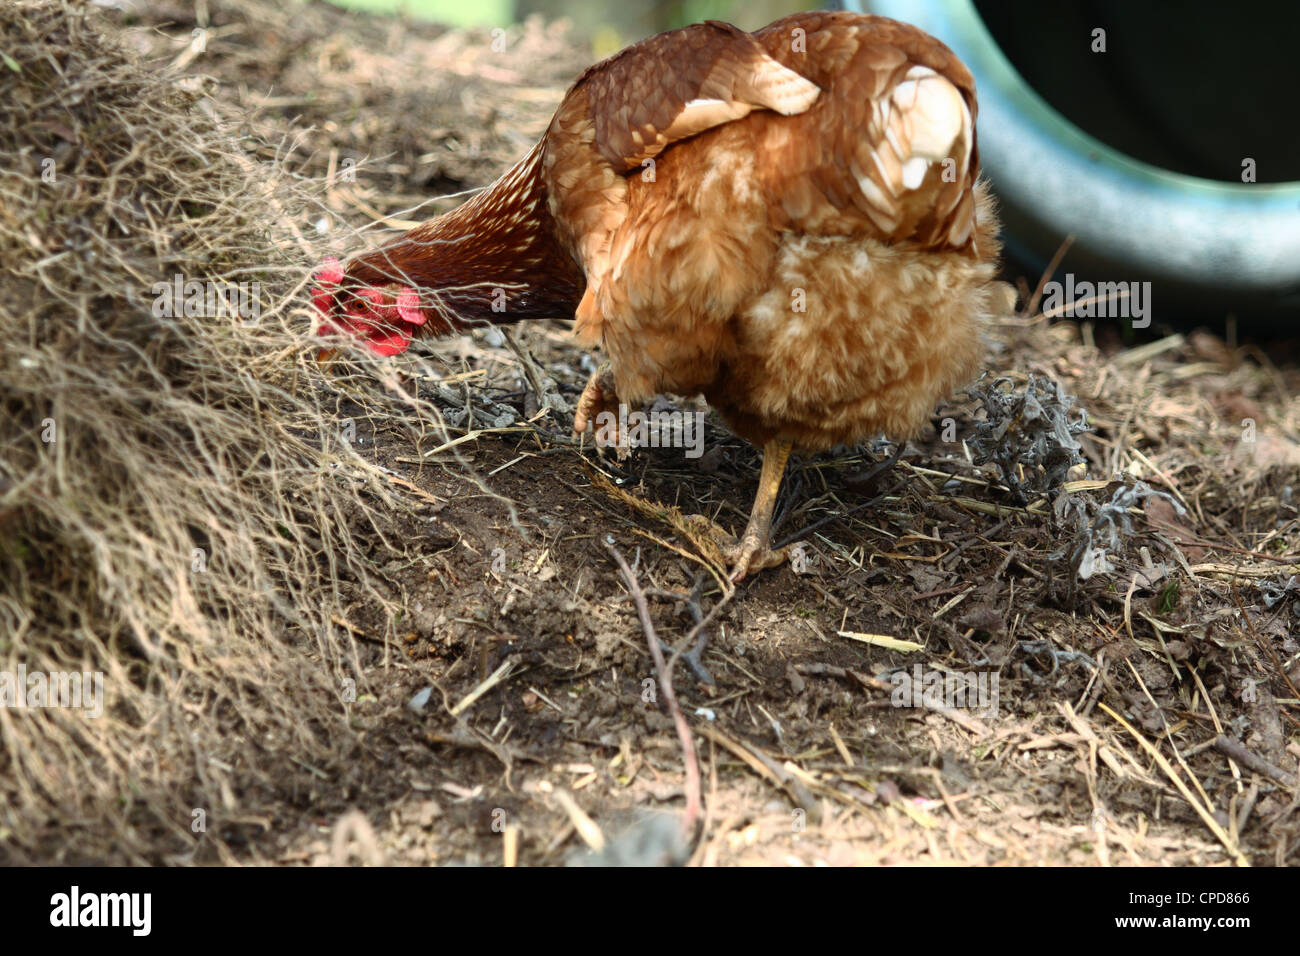 The rear view of a hybrid hen looking into dead shrubbery Stock Photo